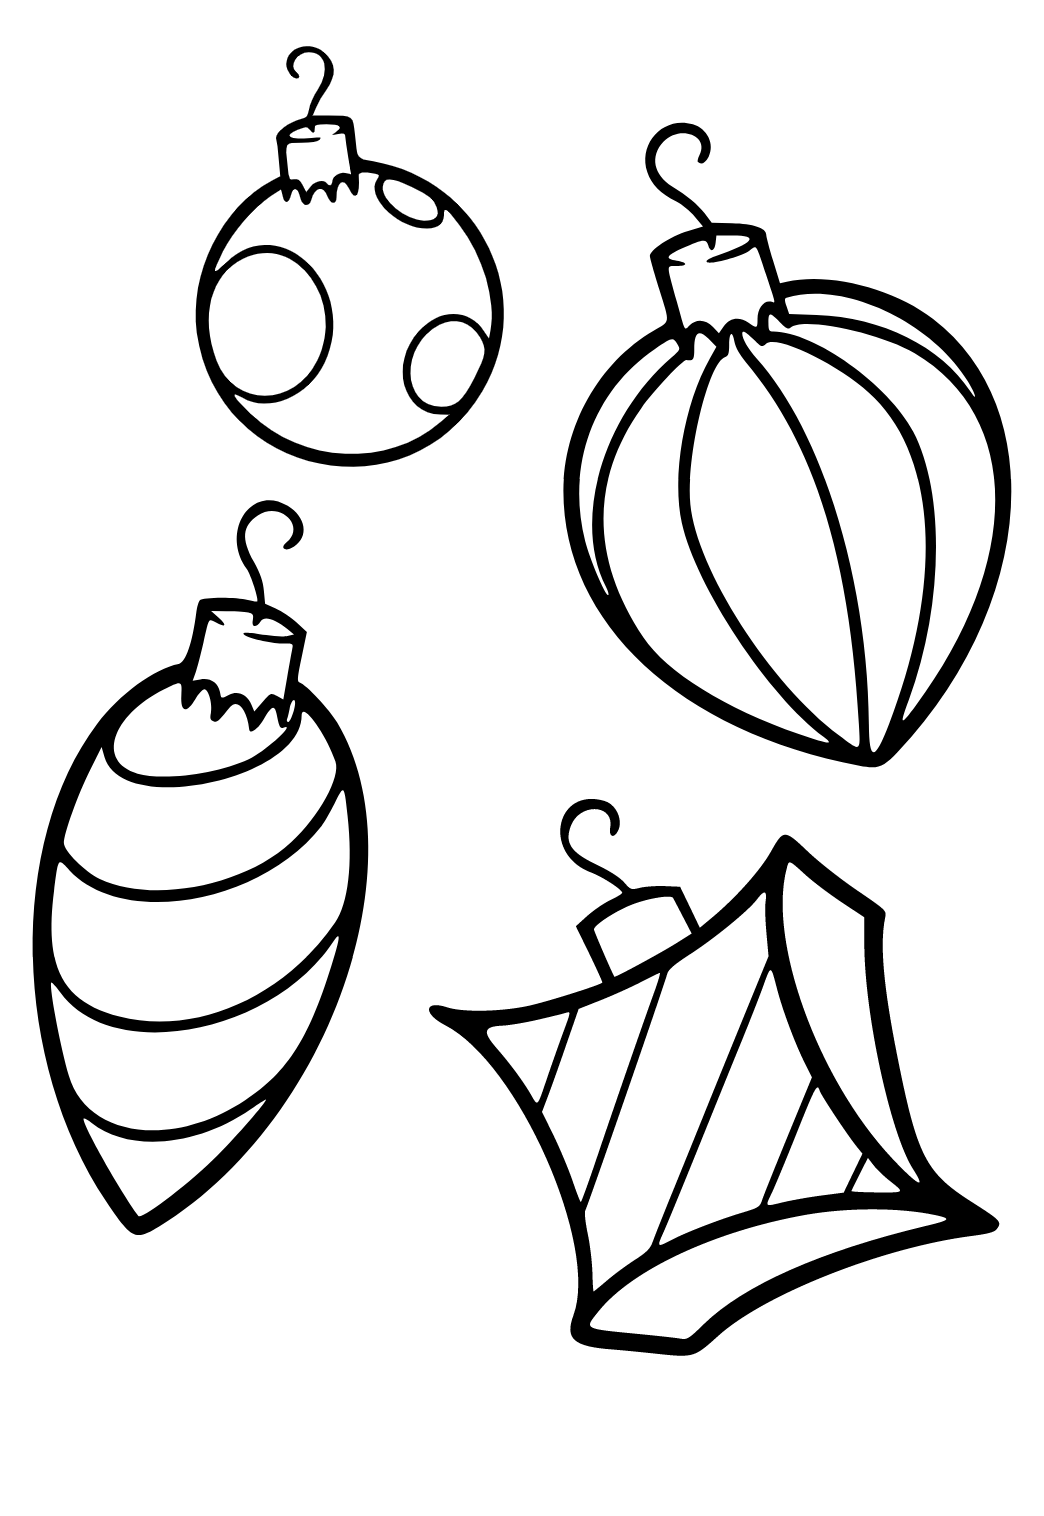 Free Printable Christmas Ornaments Shapes Coloring Page, Sheet and ...